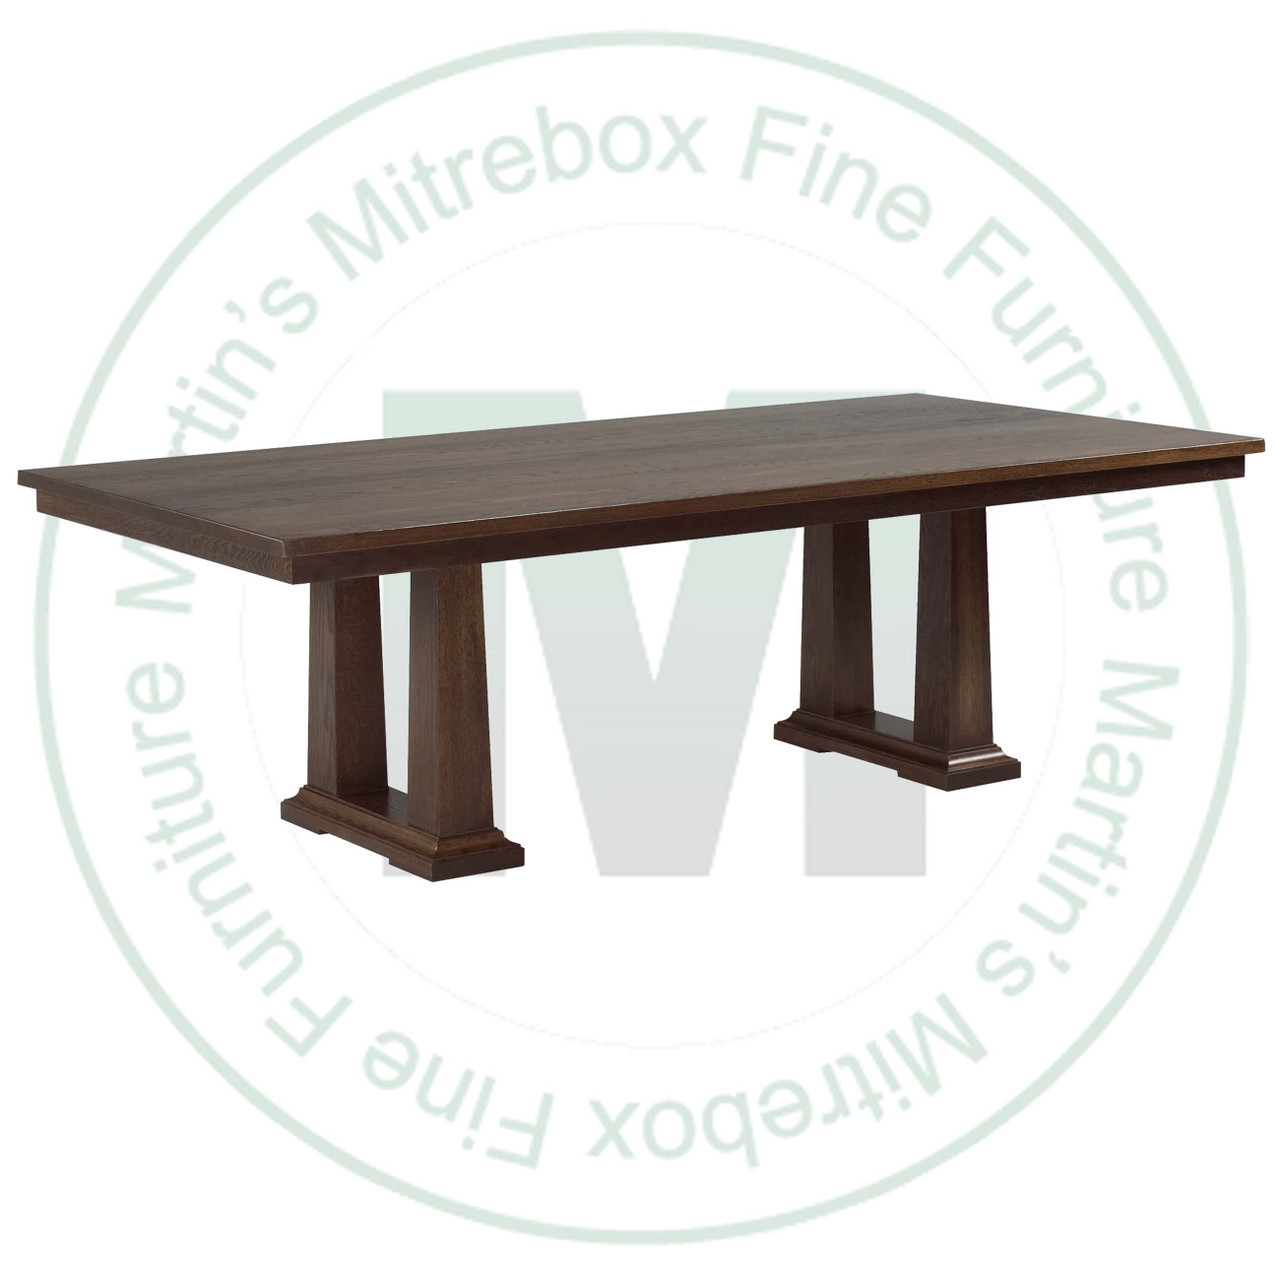 Maple Acropolis Extension Double Pedestal Table 54''D x 84''W x 30''H With 2 - 12'' Leaves Table Has 1.75'' Thick Top